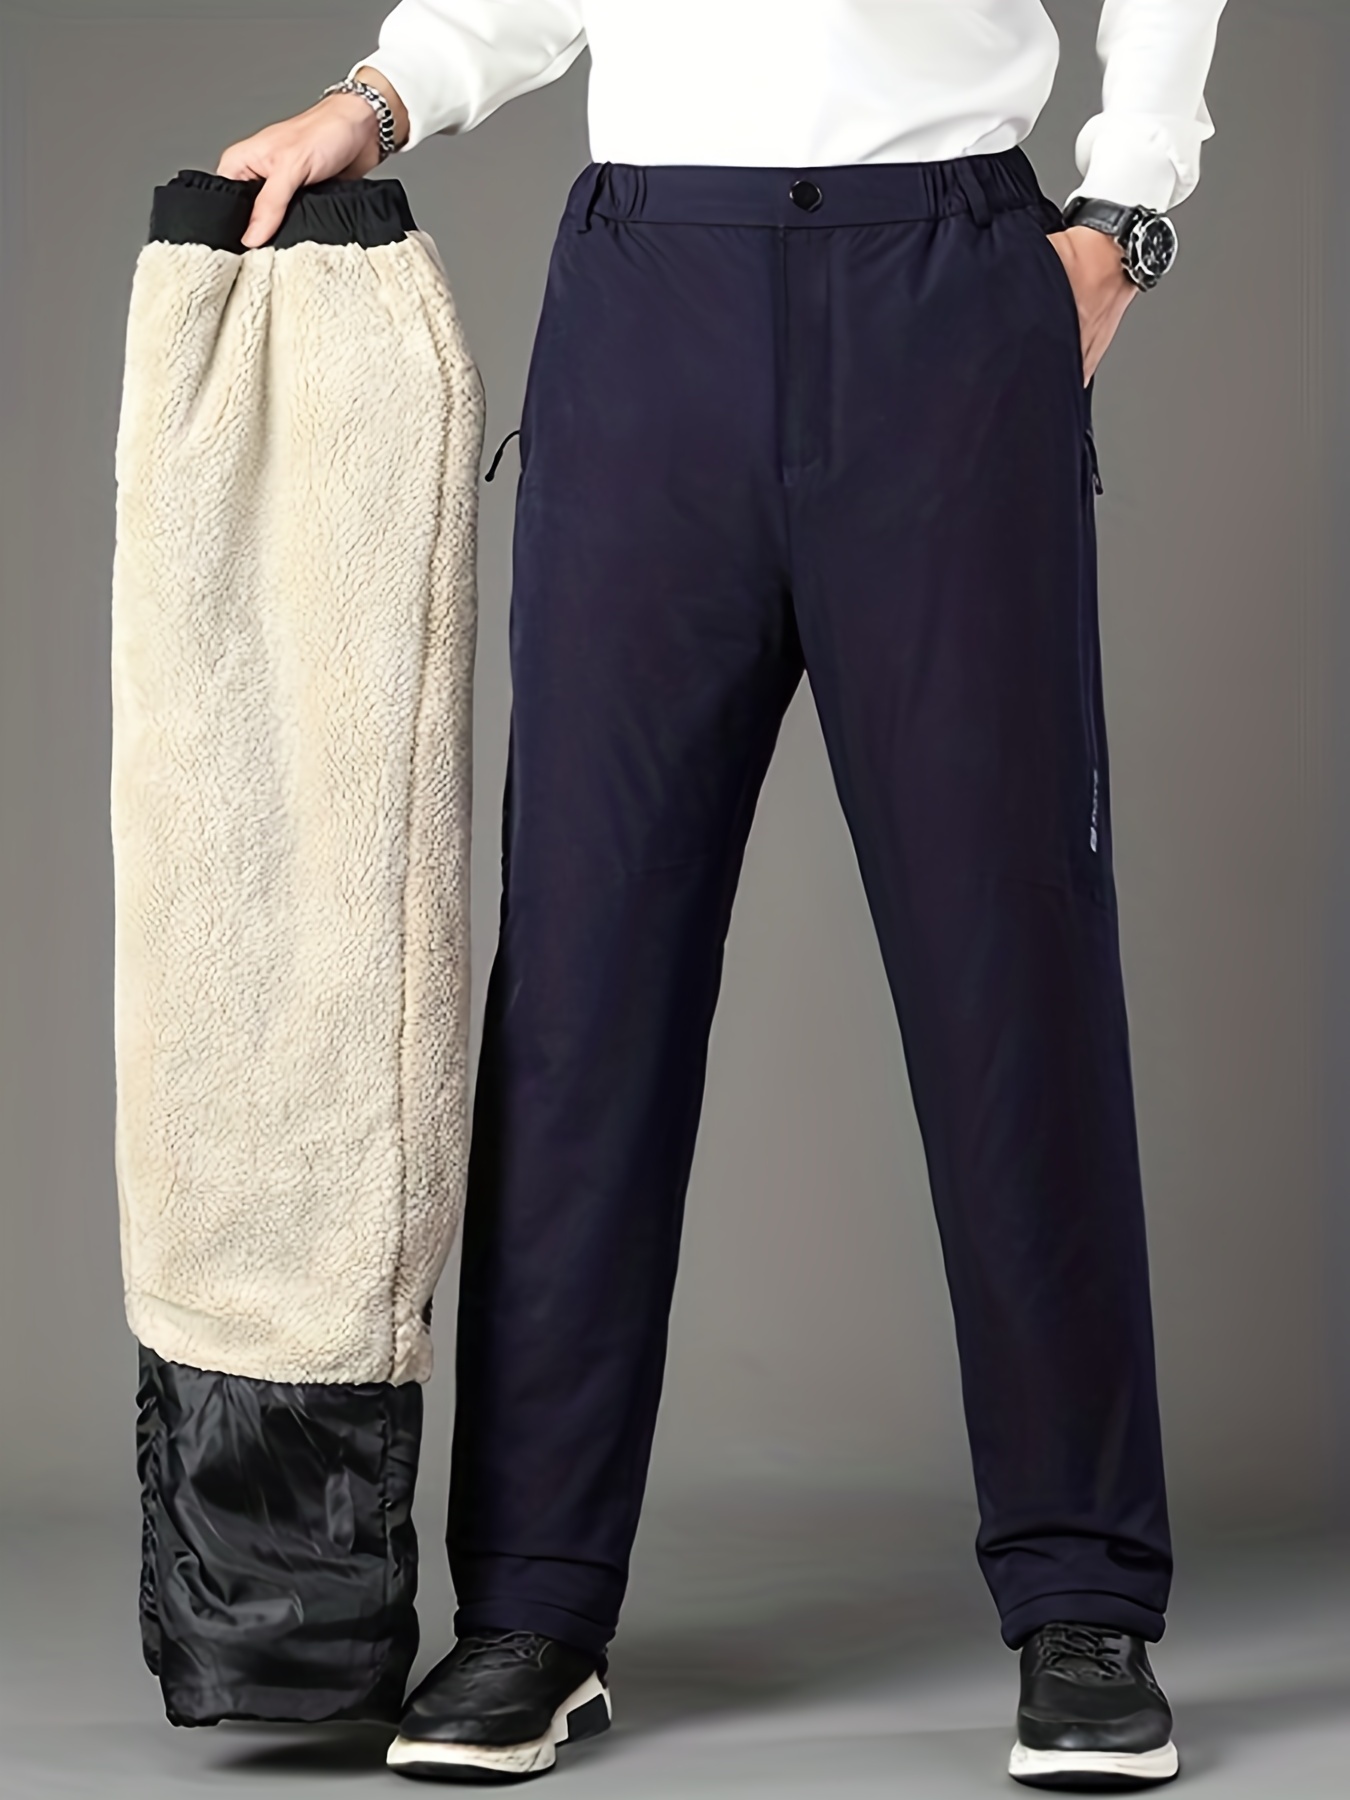 Mens Winter Thermal Jeans Fleece Lined Denim Pants Fit Straight Long  Trousers 